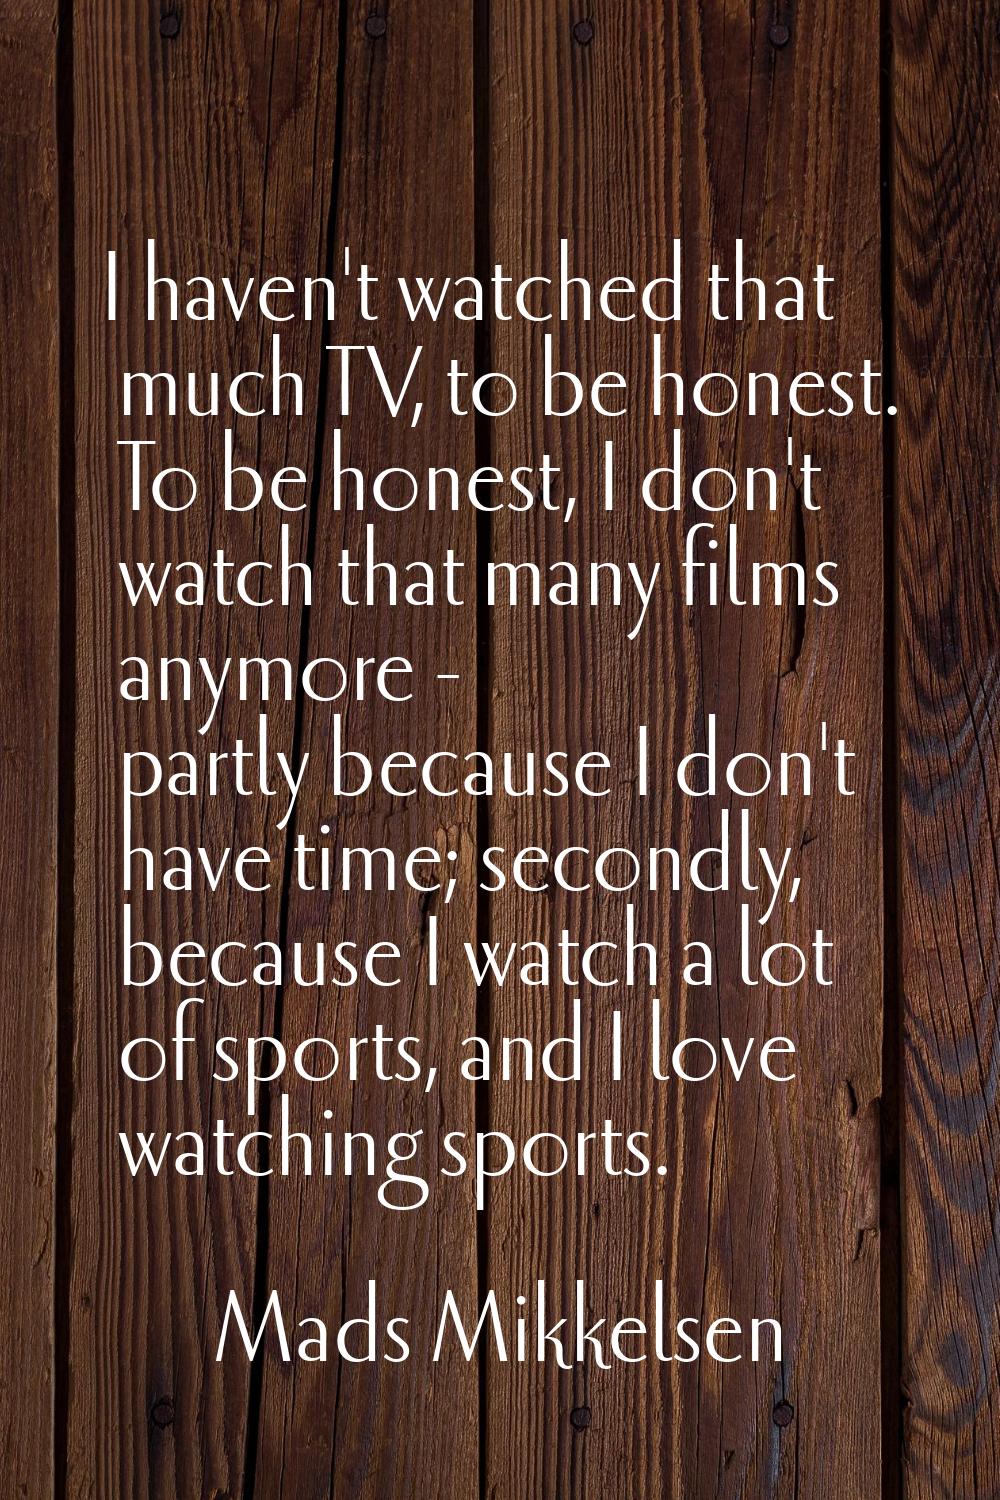 I haven't watched that much TV, to be honest. To be honest, I don't watch that many films anymore -